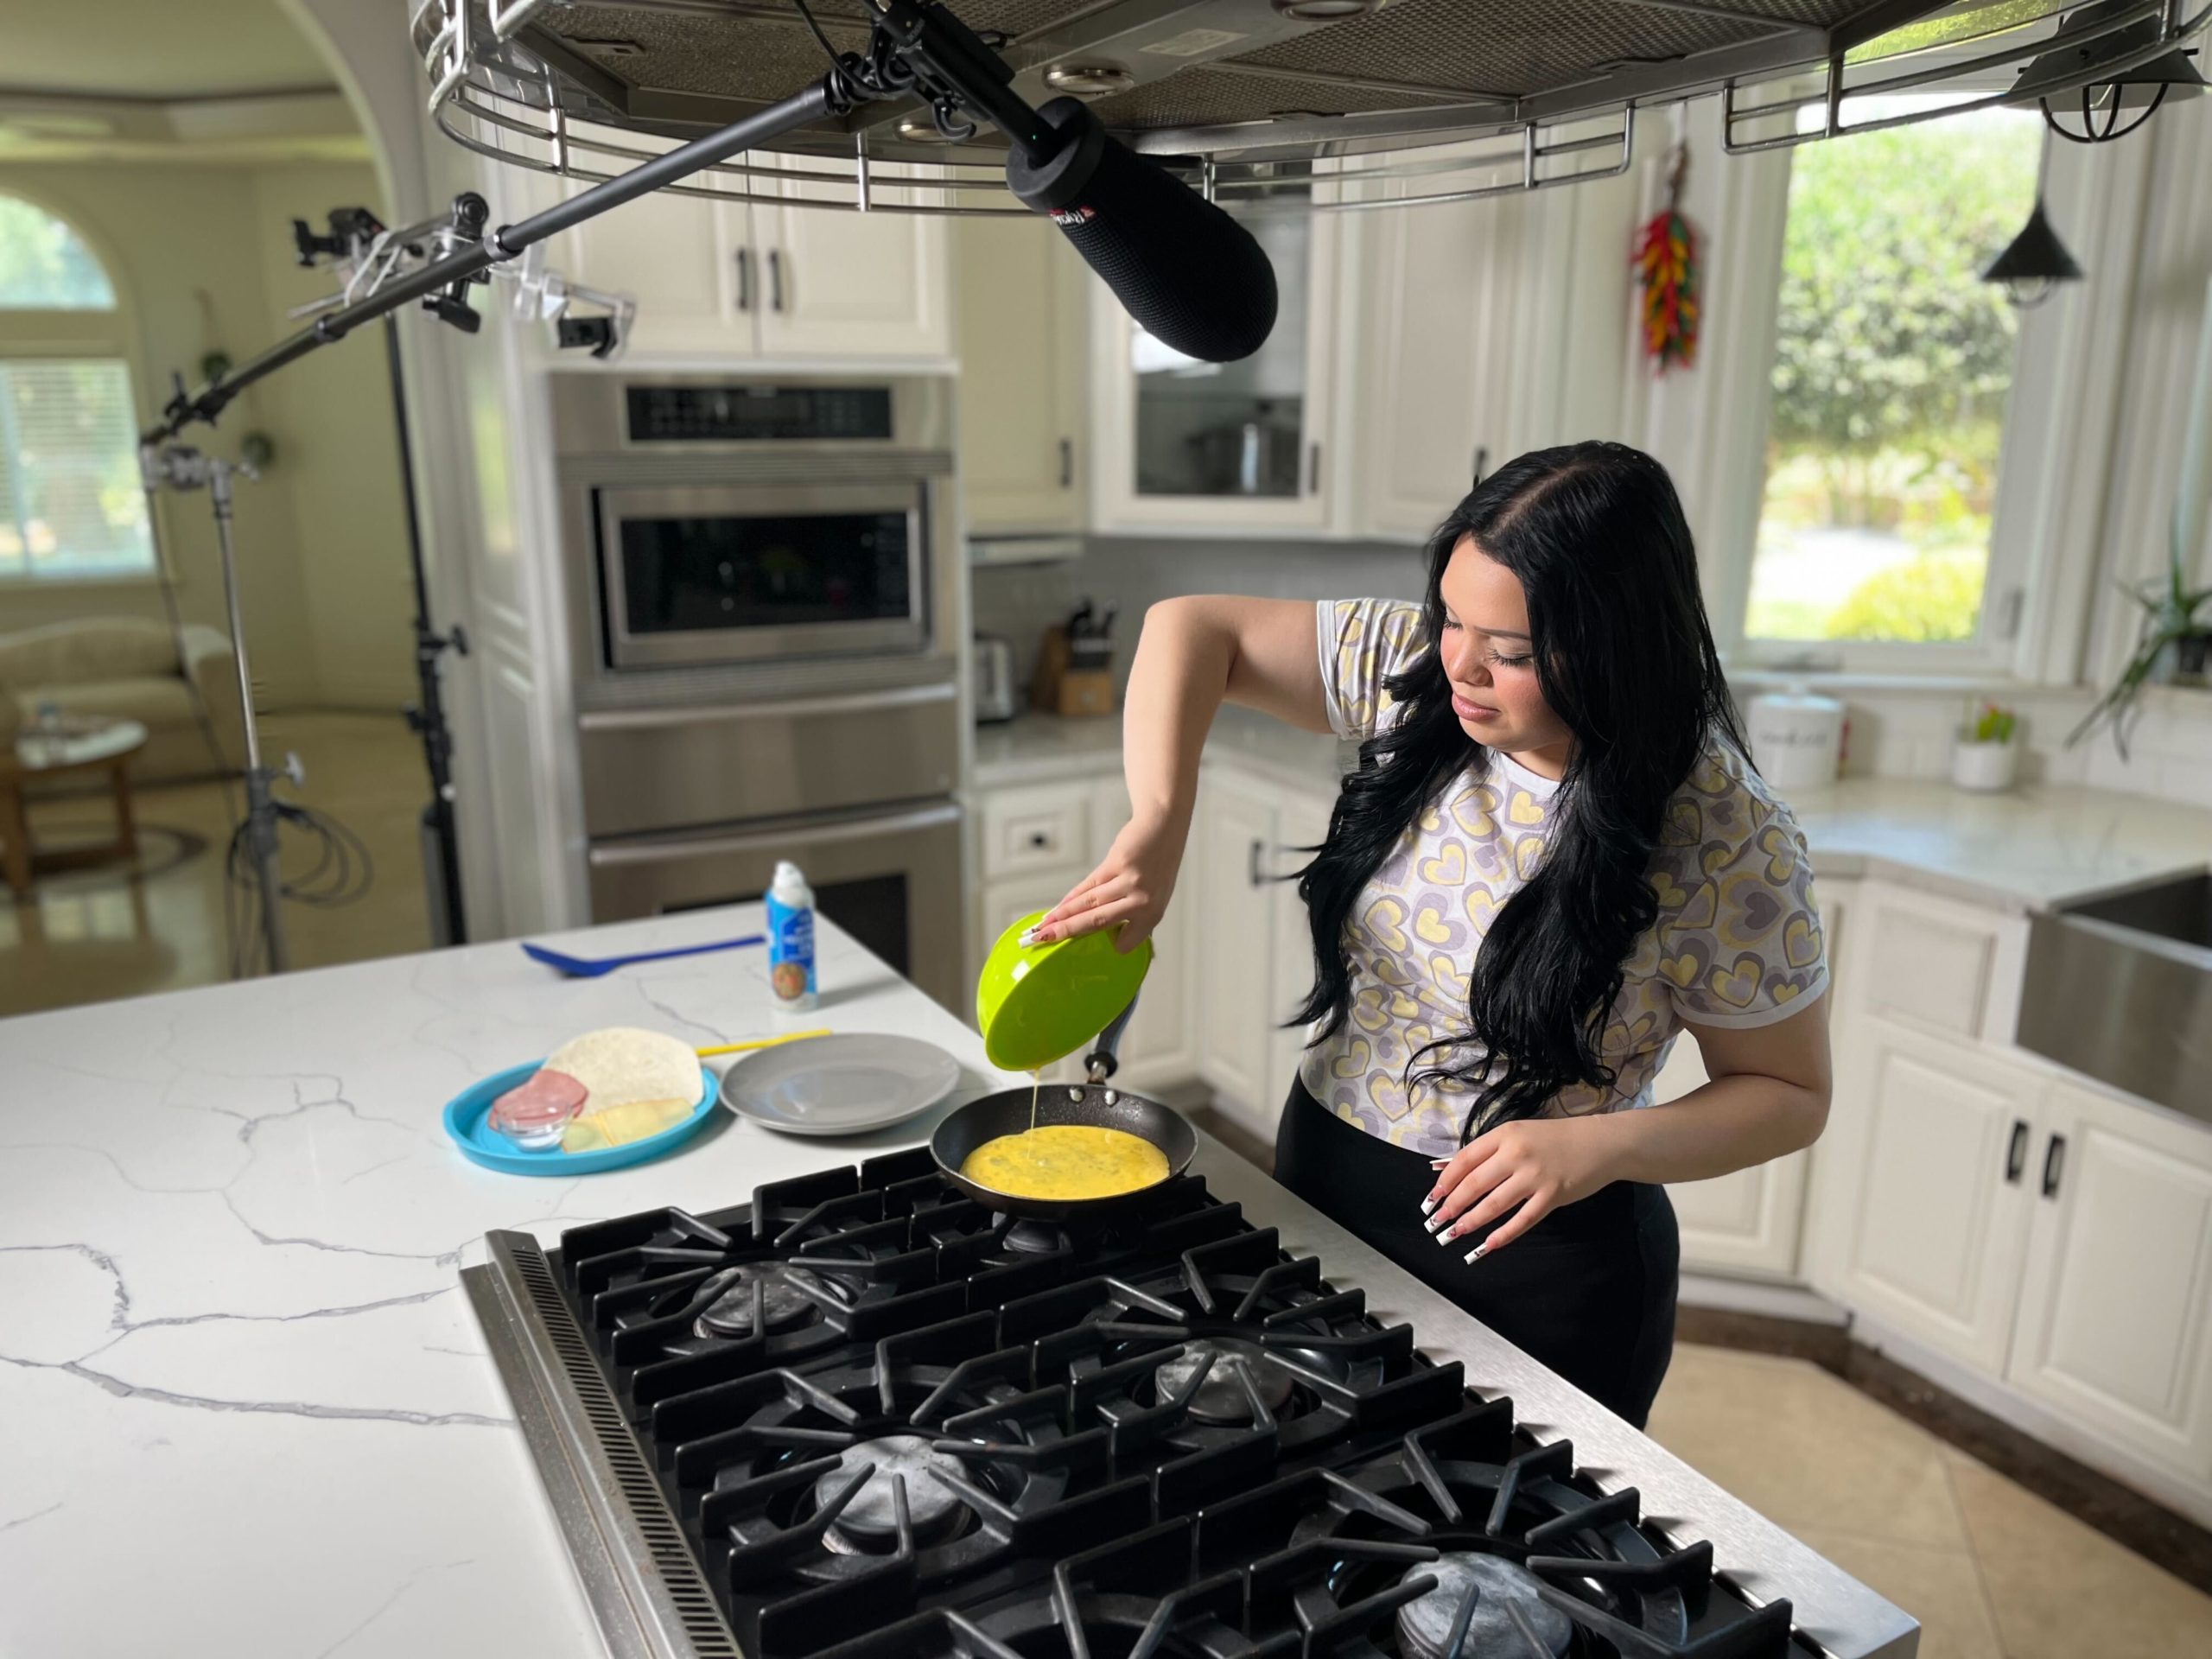 Multi-platform video creator Karina Garcia in a kitchen cooking on the stove top with microphone leaning in front